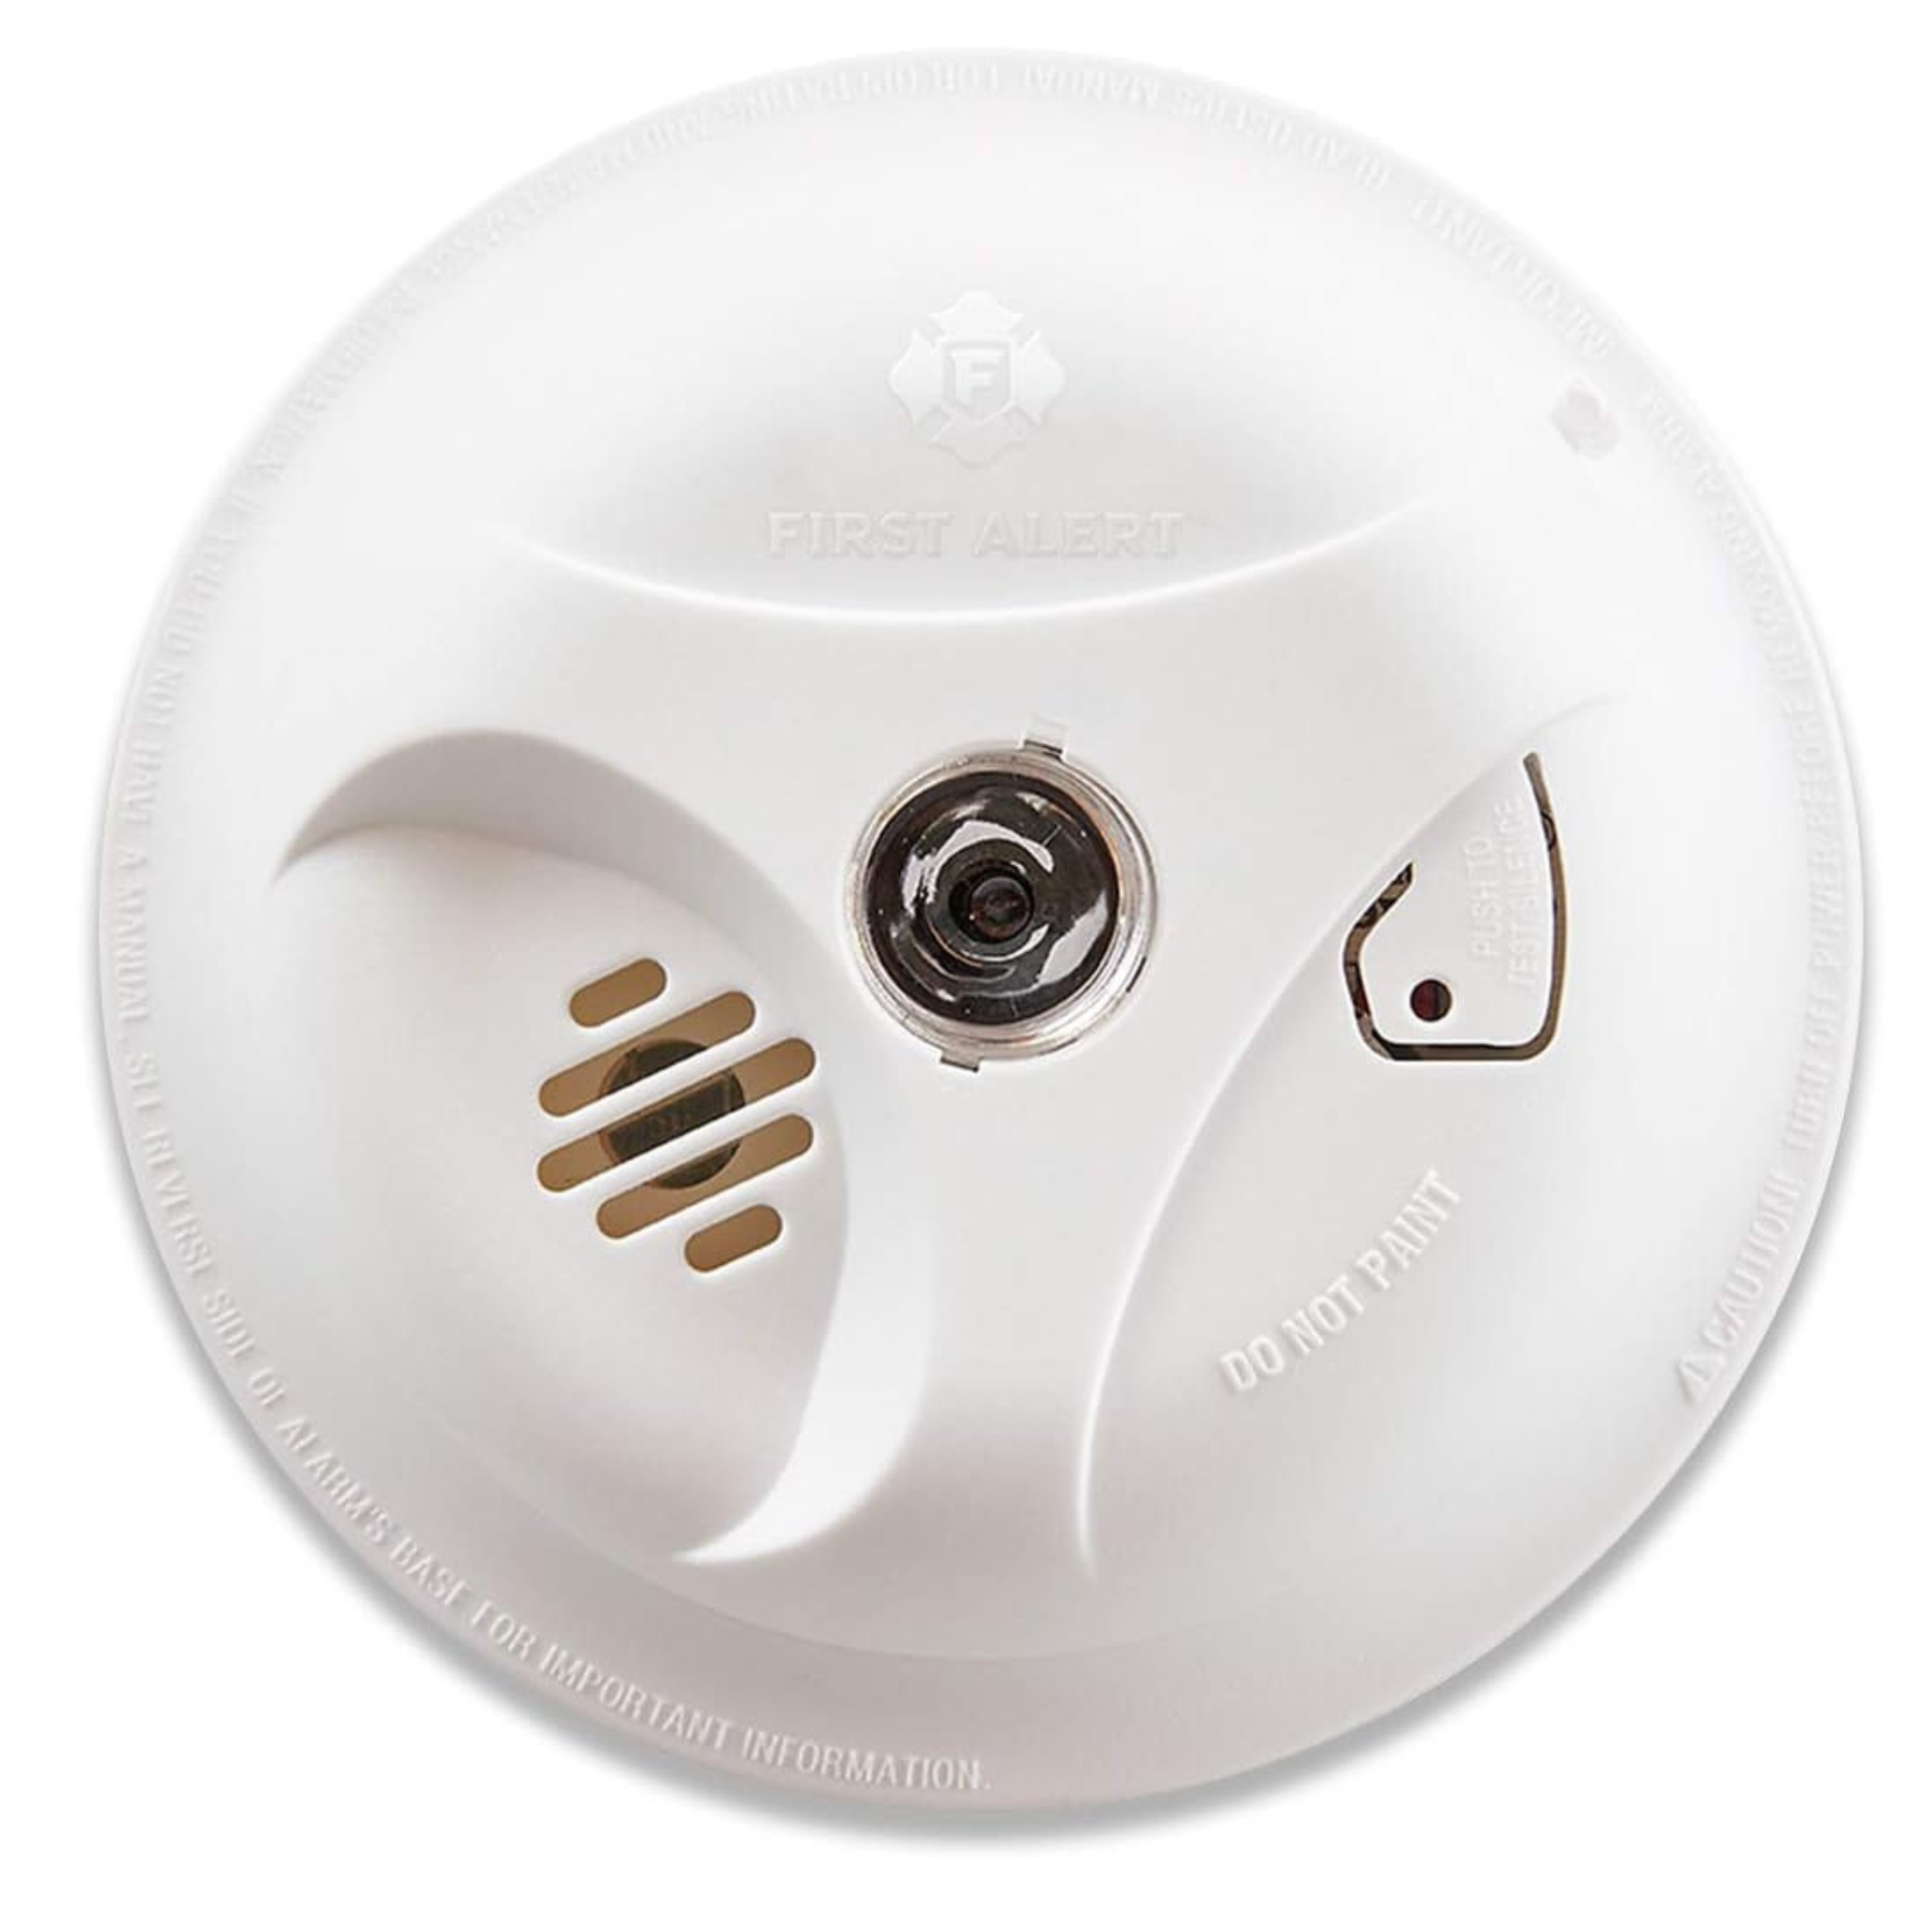 FIRST ALERT Smoke Alarm with Escape Light – Battery Powered